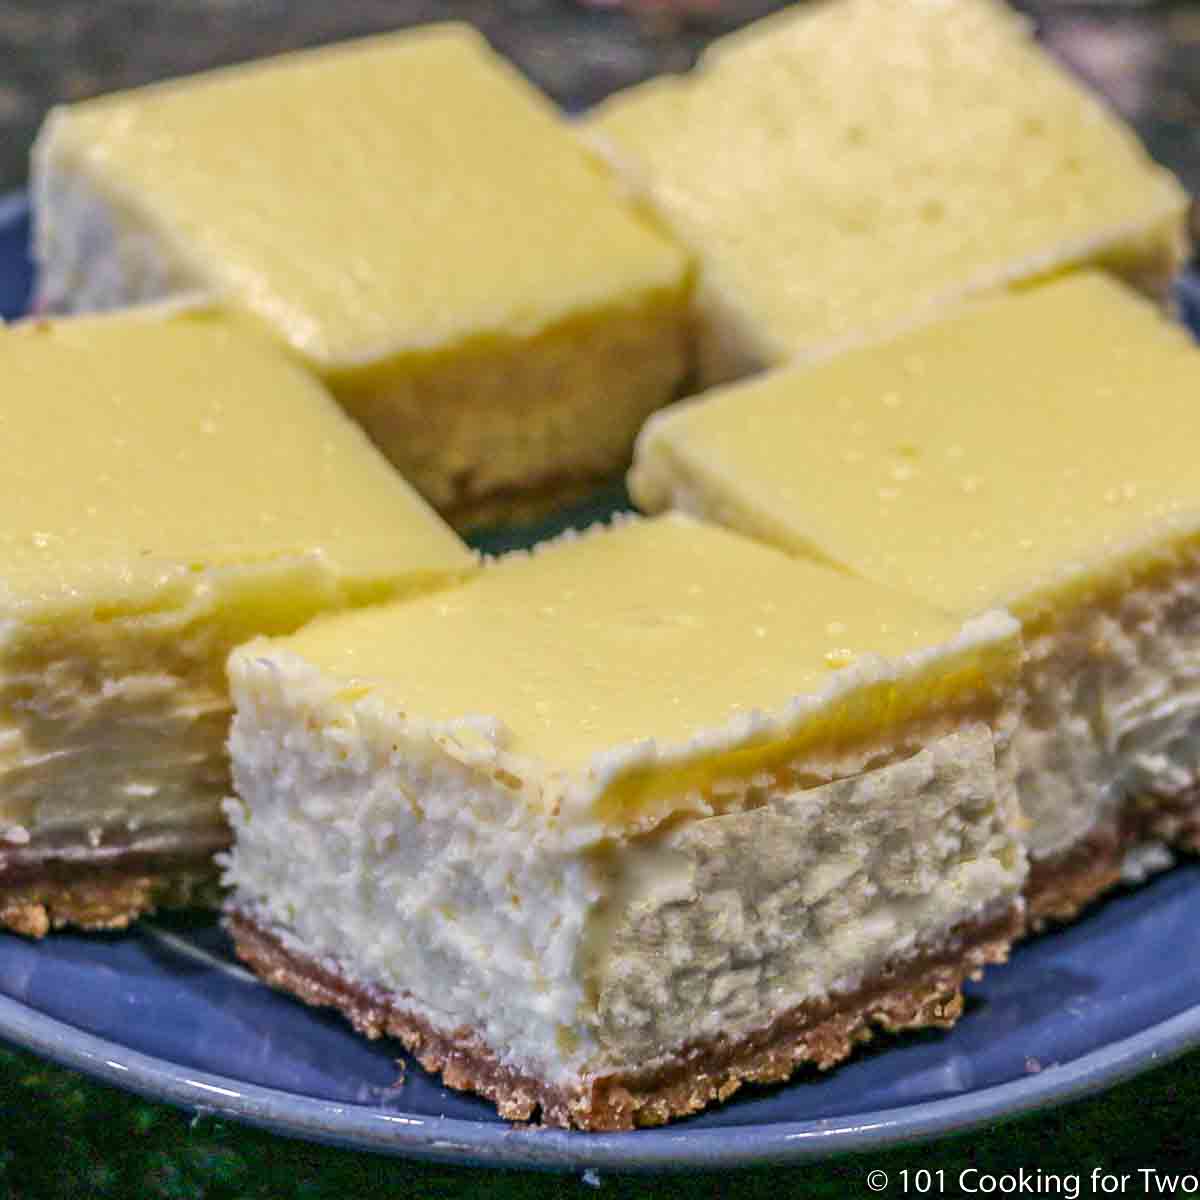 Cheesecake bars on a blue plate.